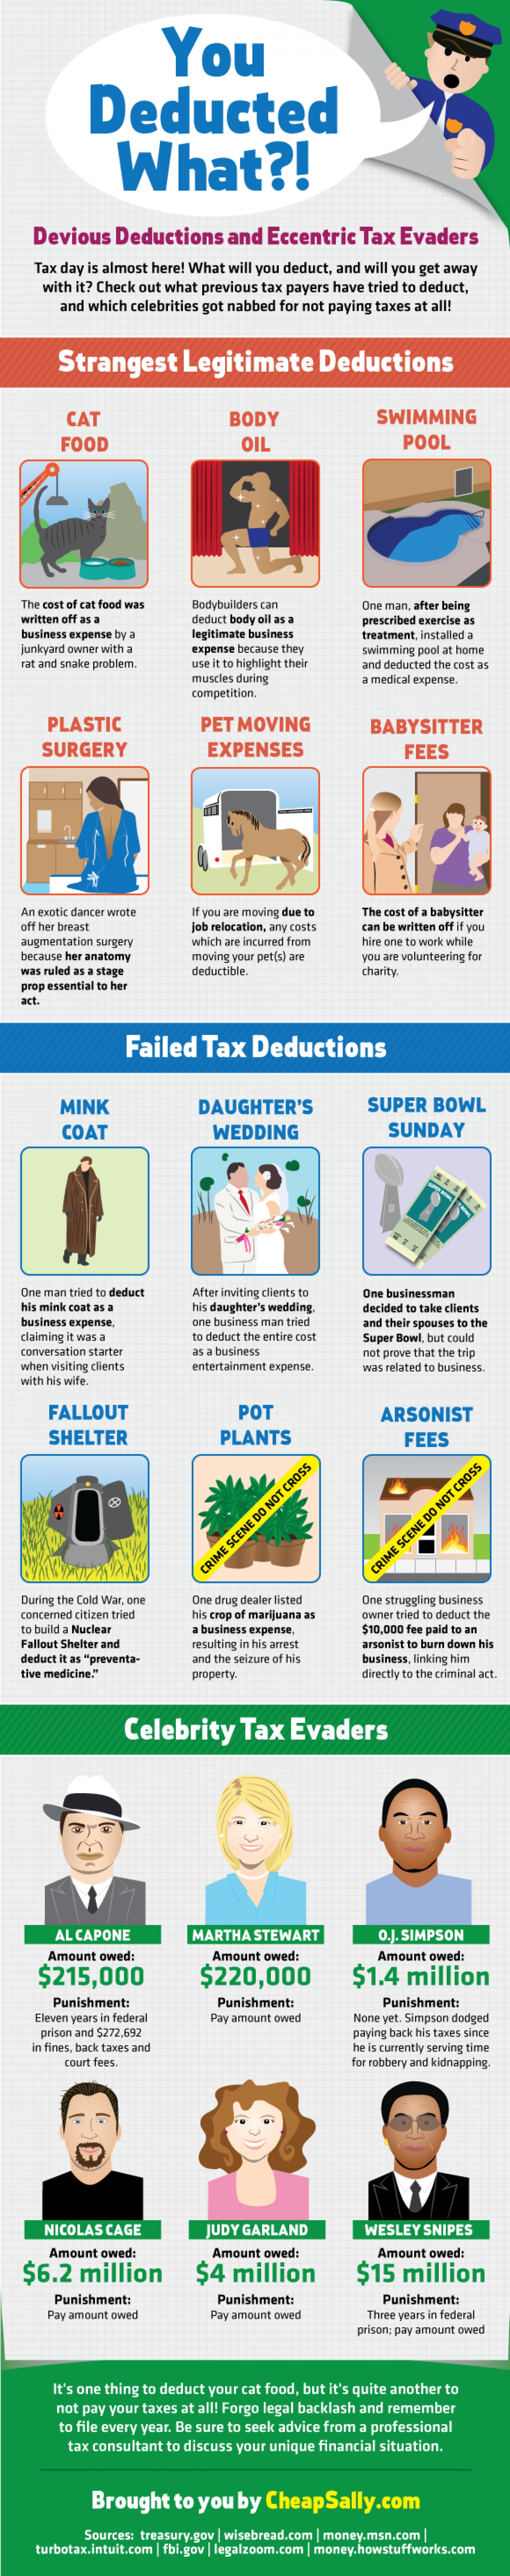 You Deducted What? Devious Deductions & Eccentric Tax Evaders